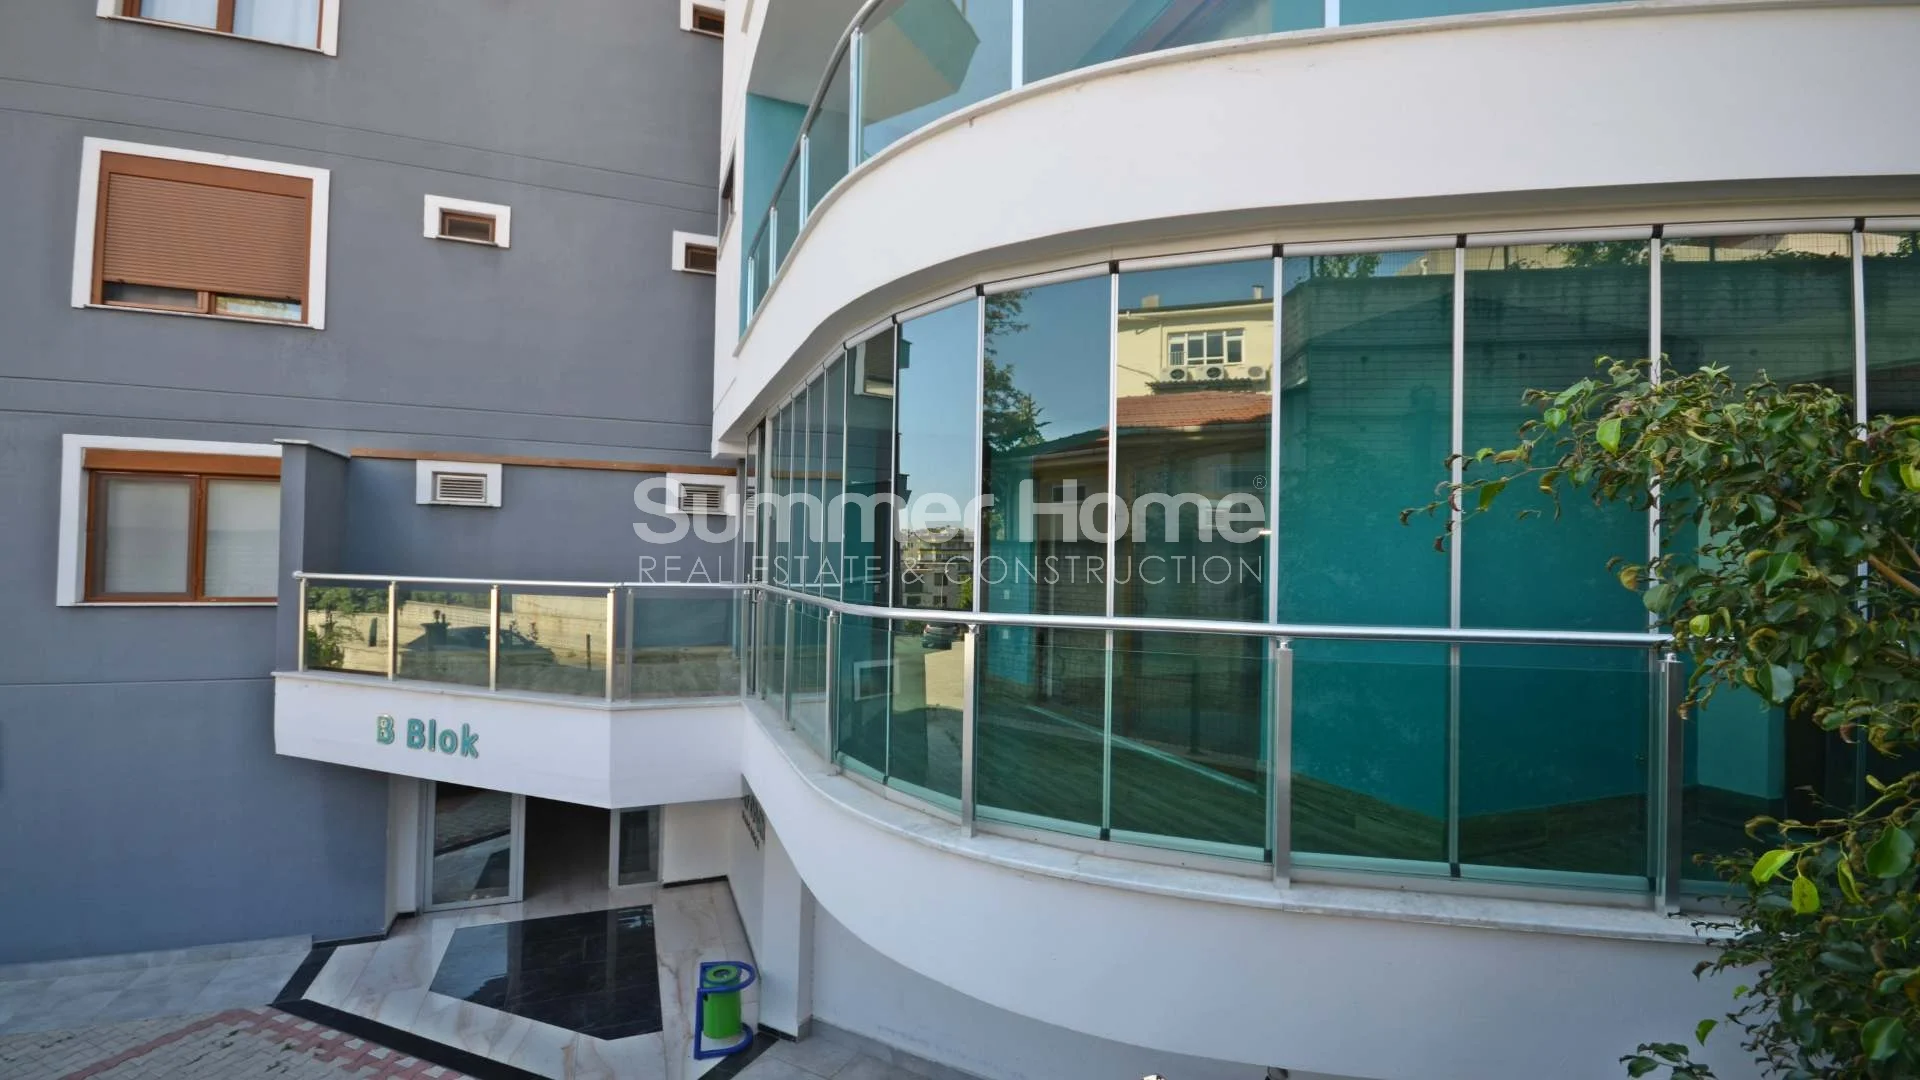 For sale Apartment Alanya Hasbahce general - 2